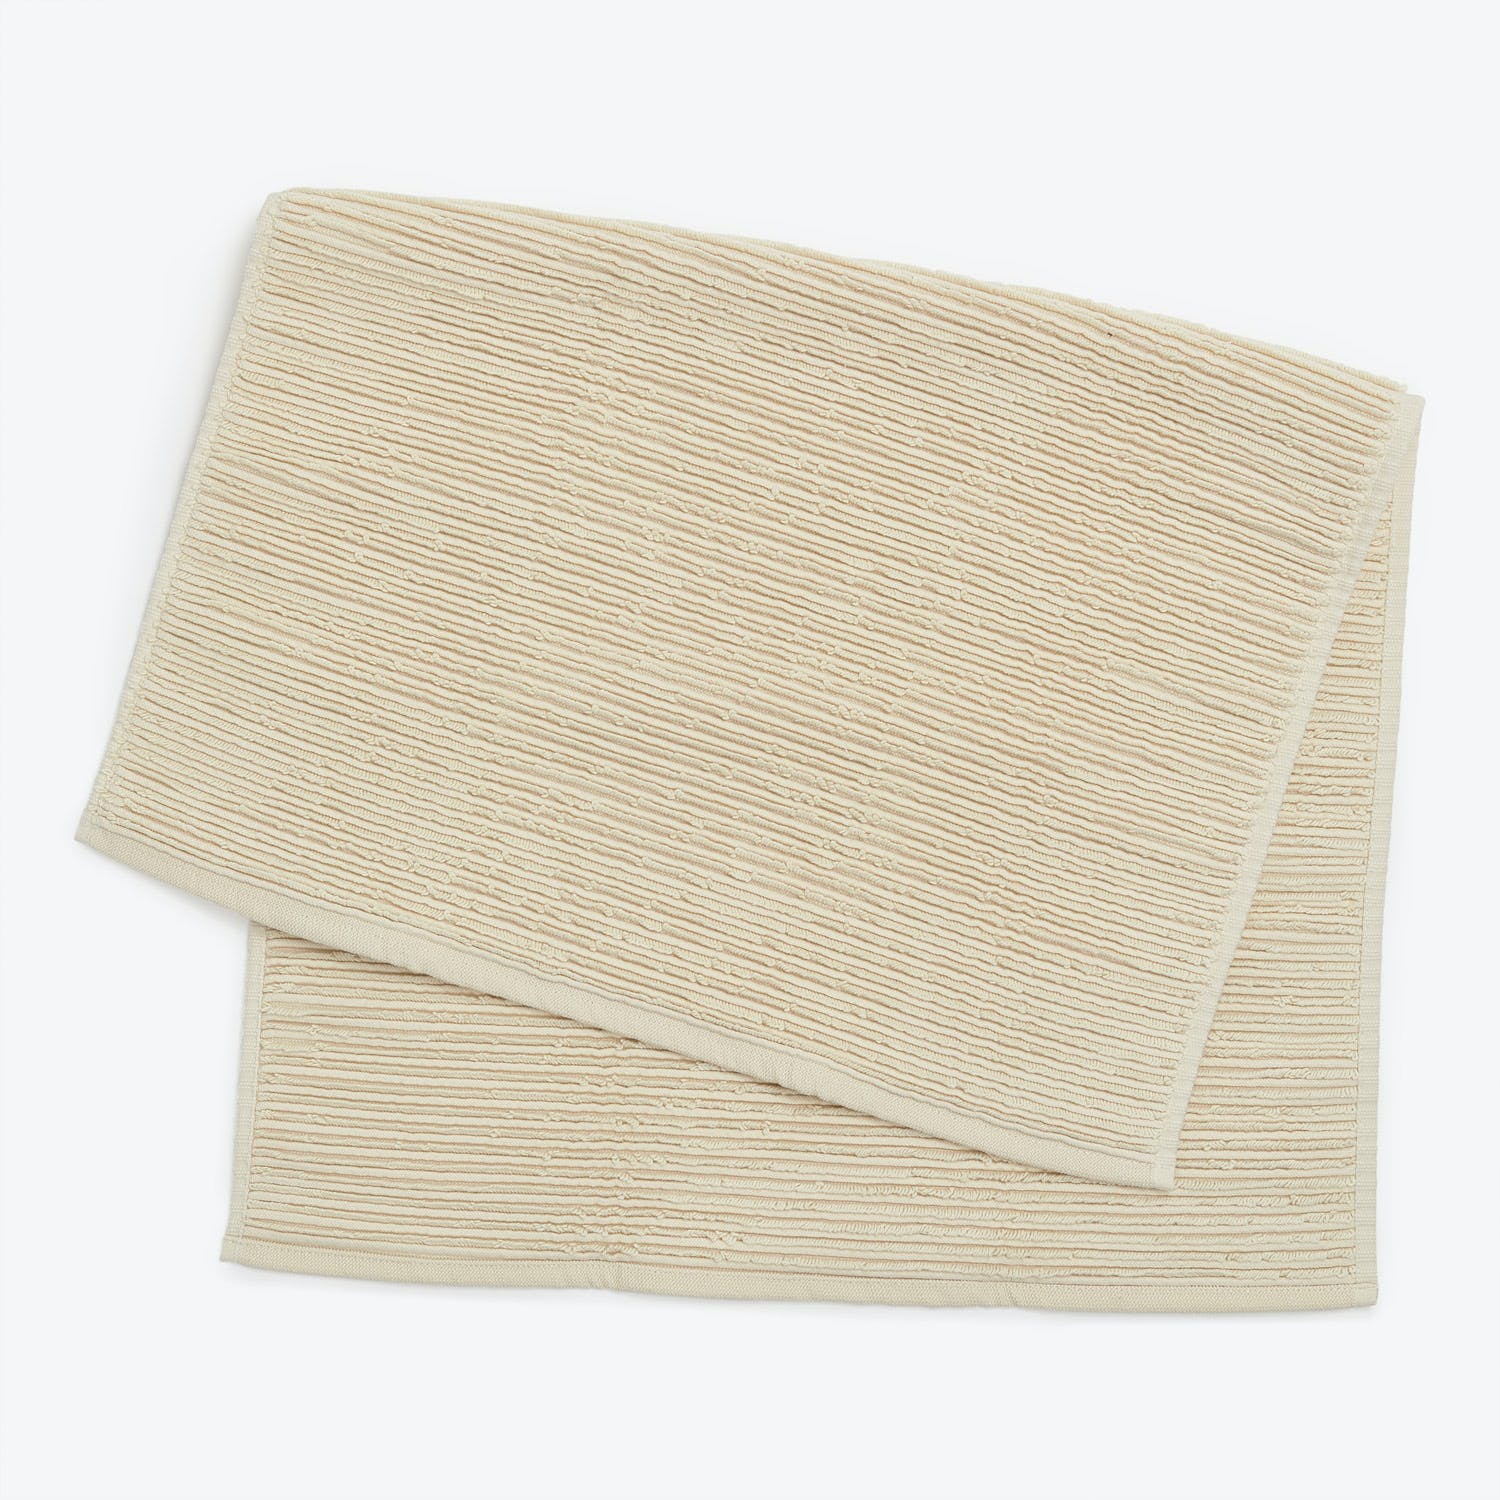 Folded light beige towel with ribbed texture against plain background.